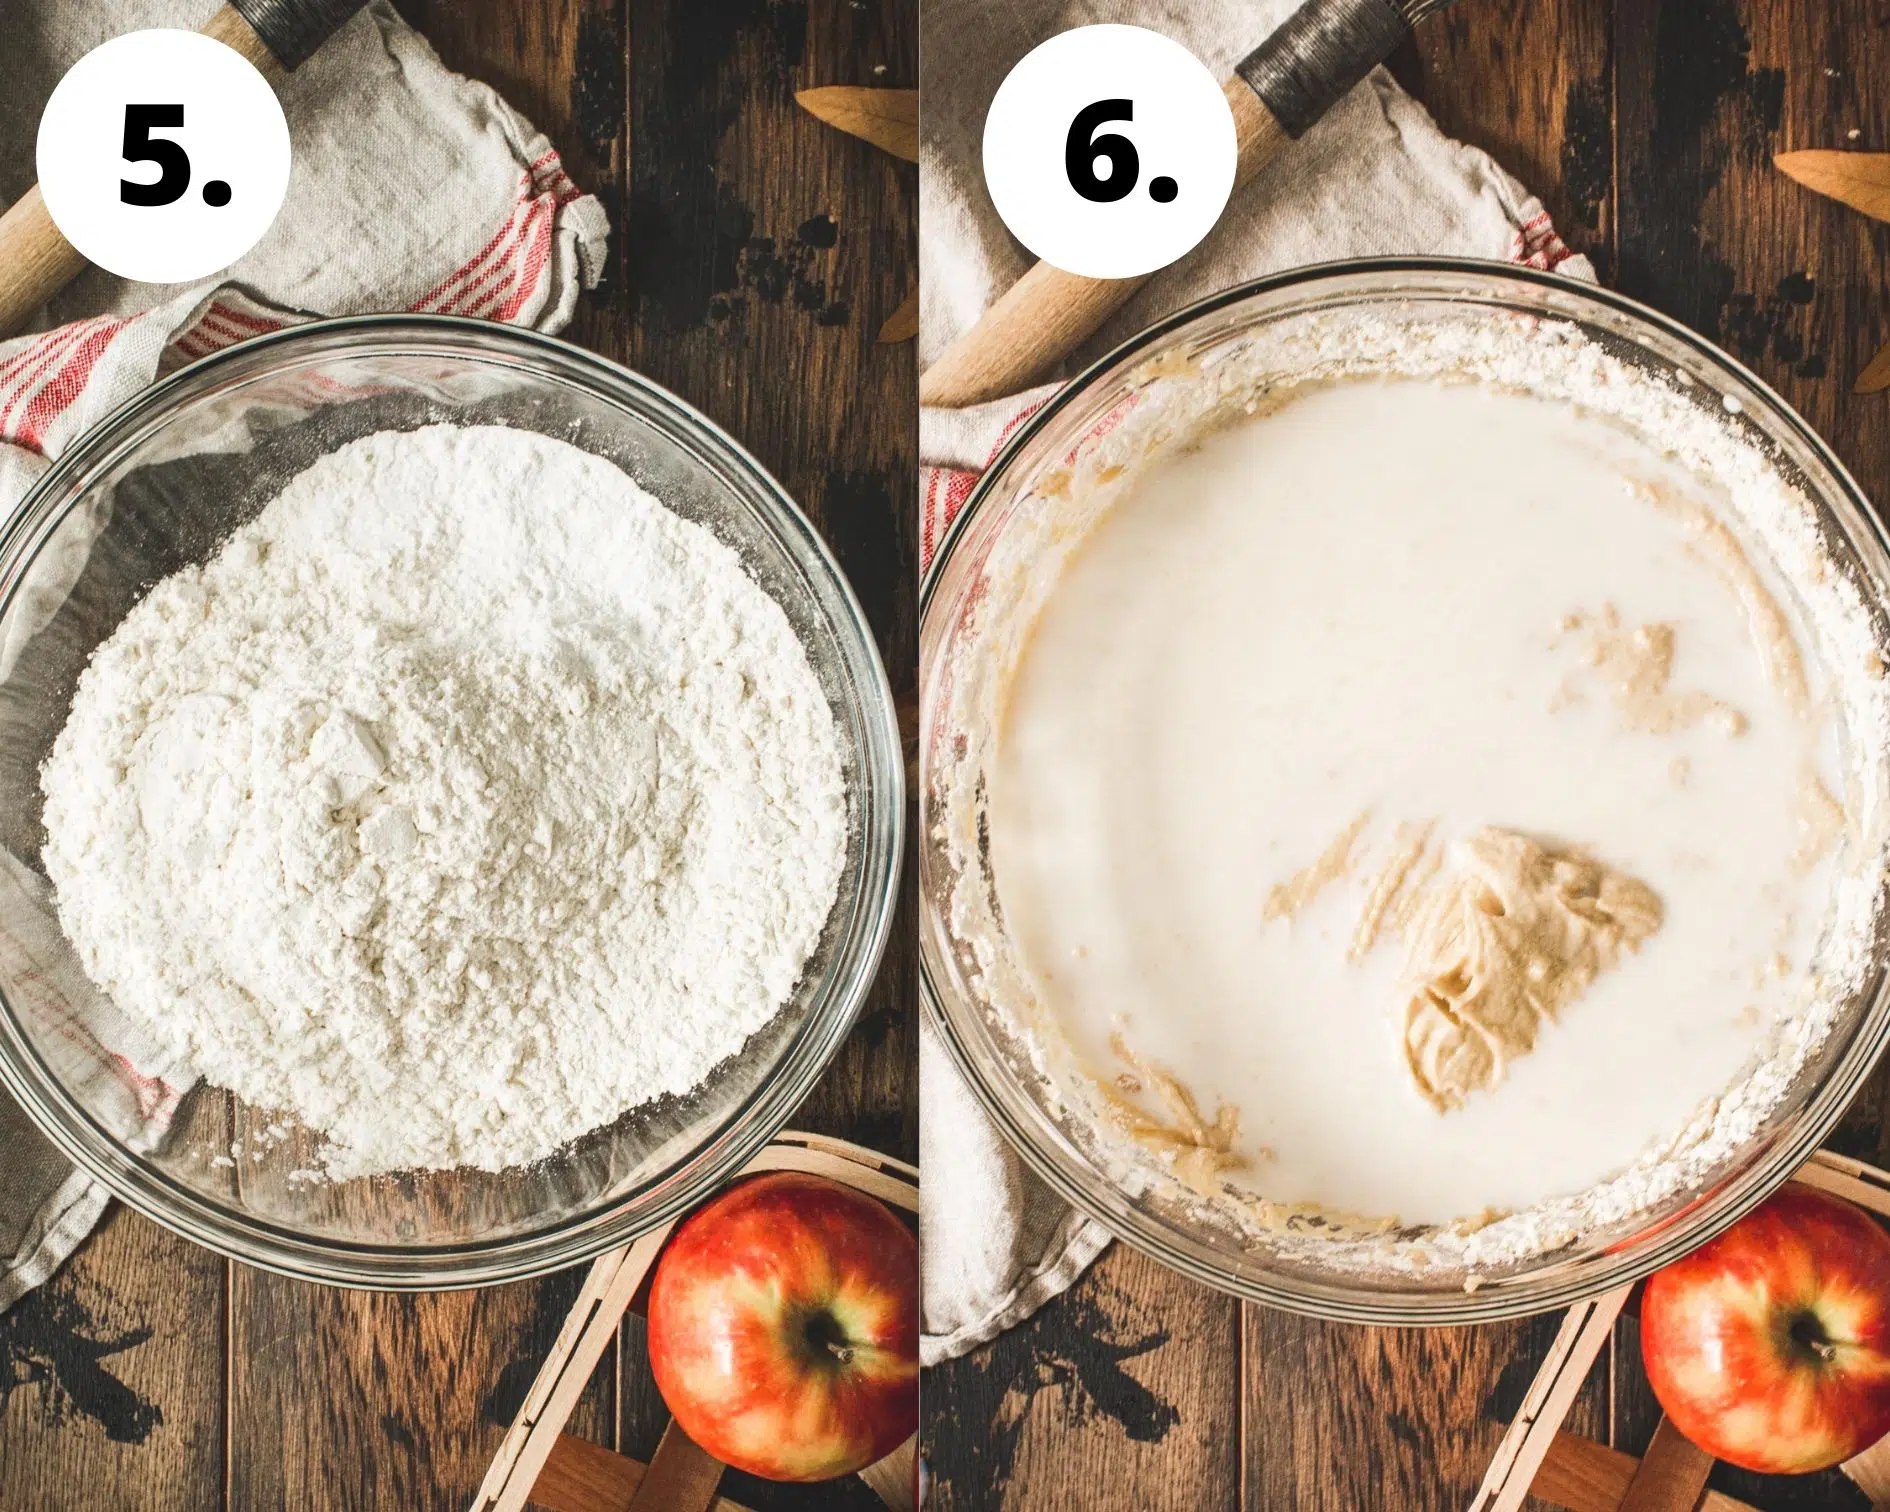 Apple crumb cake process steps 5 and 6.